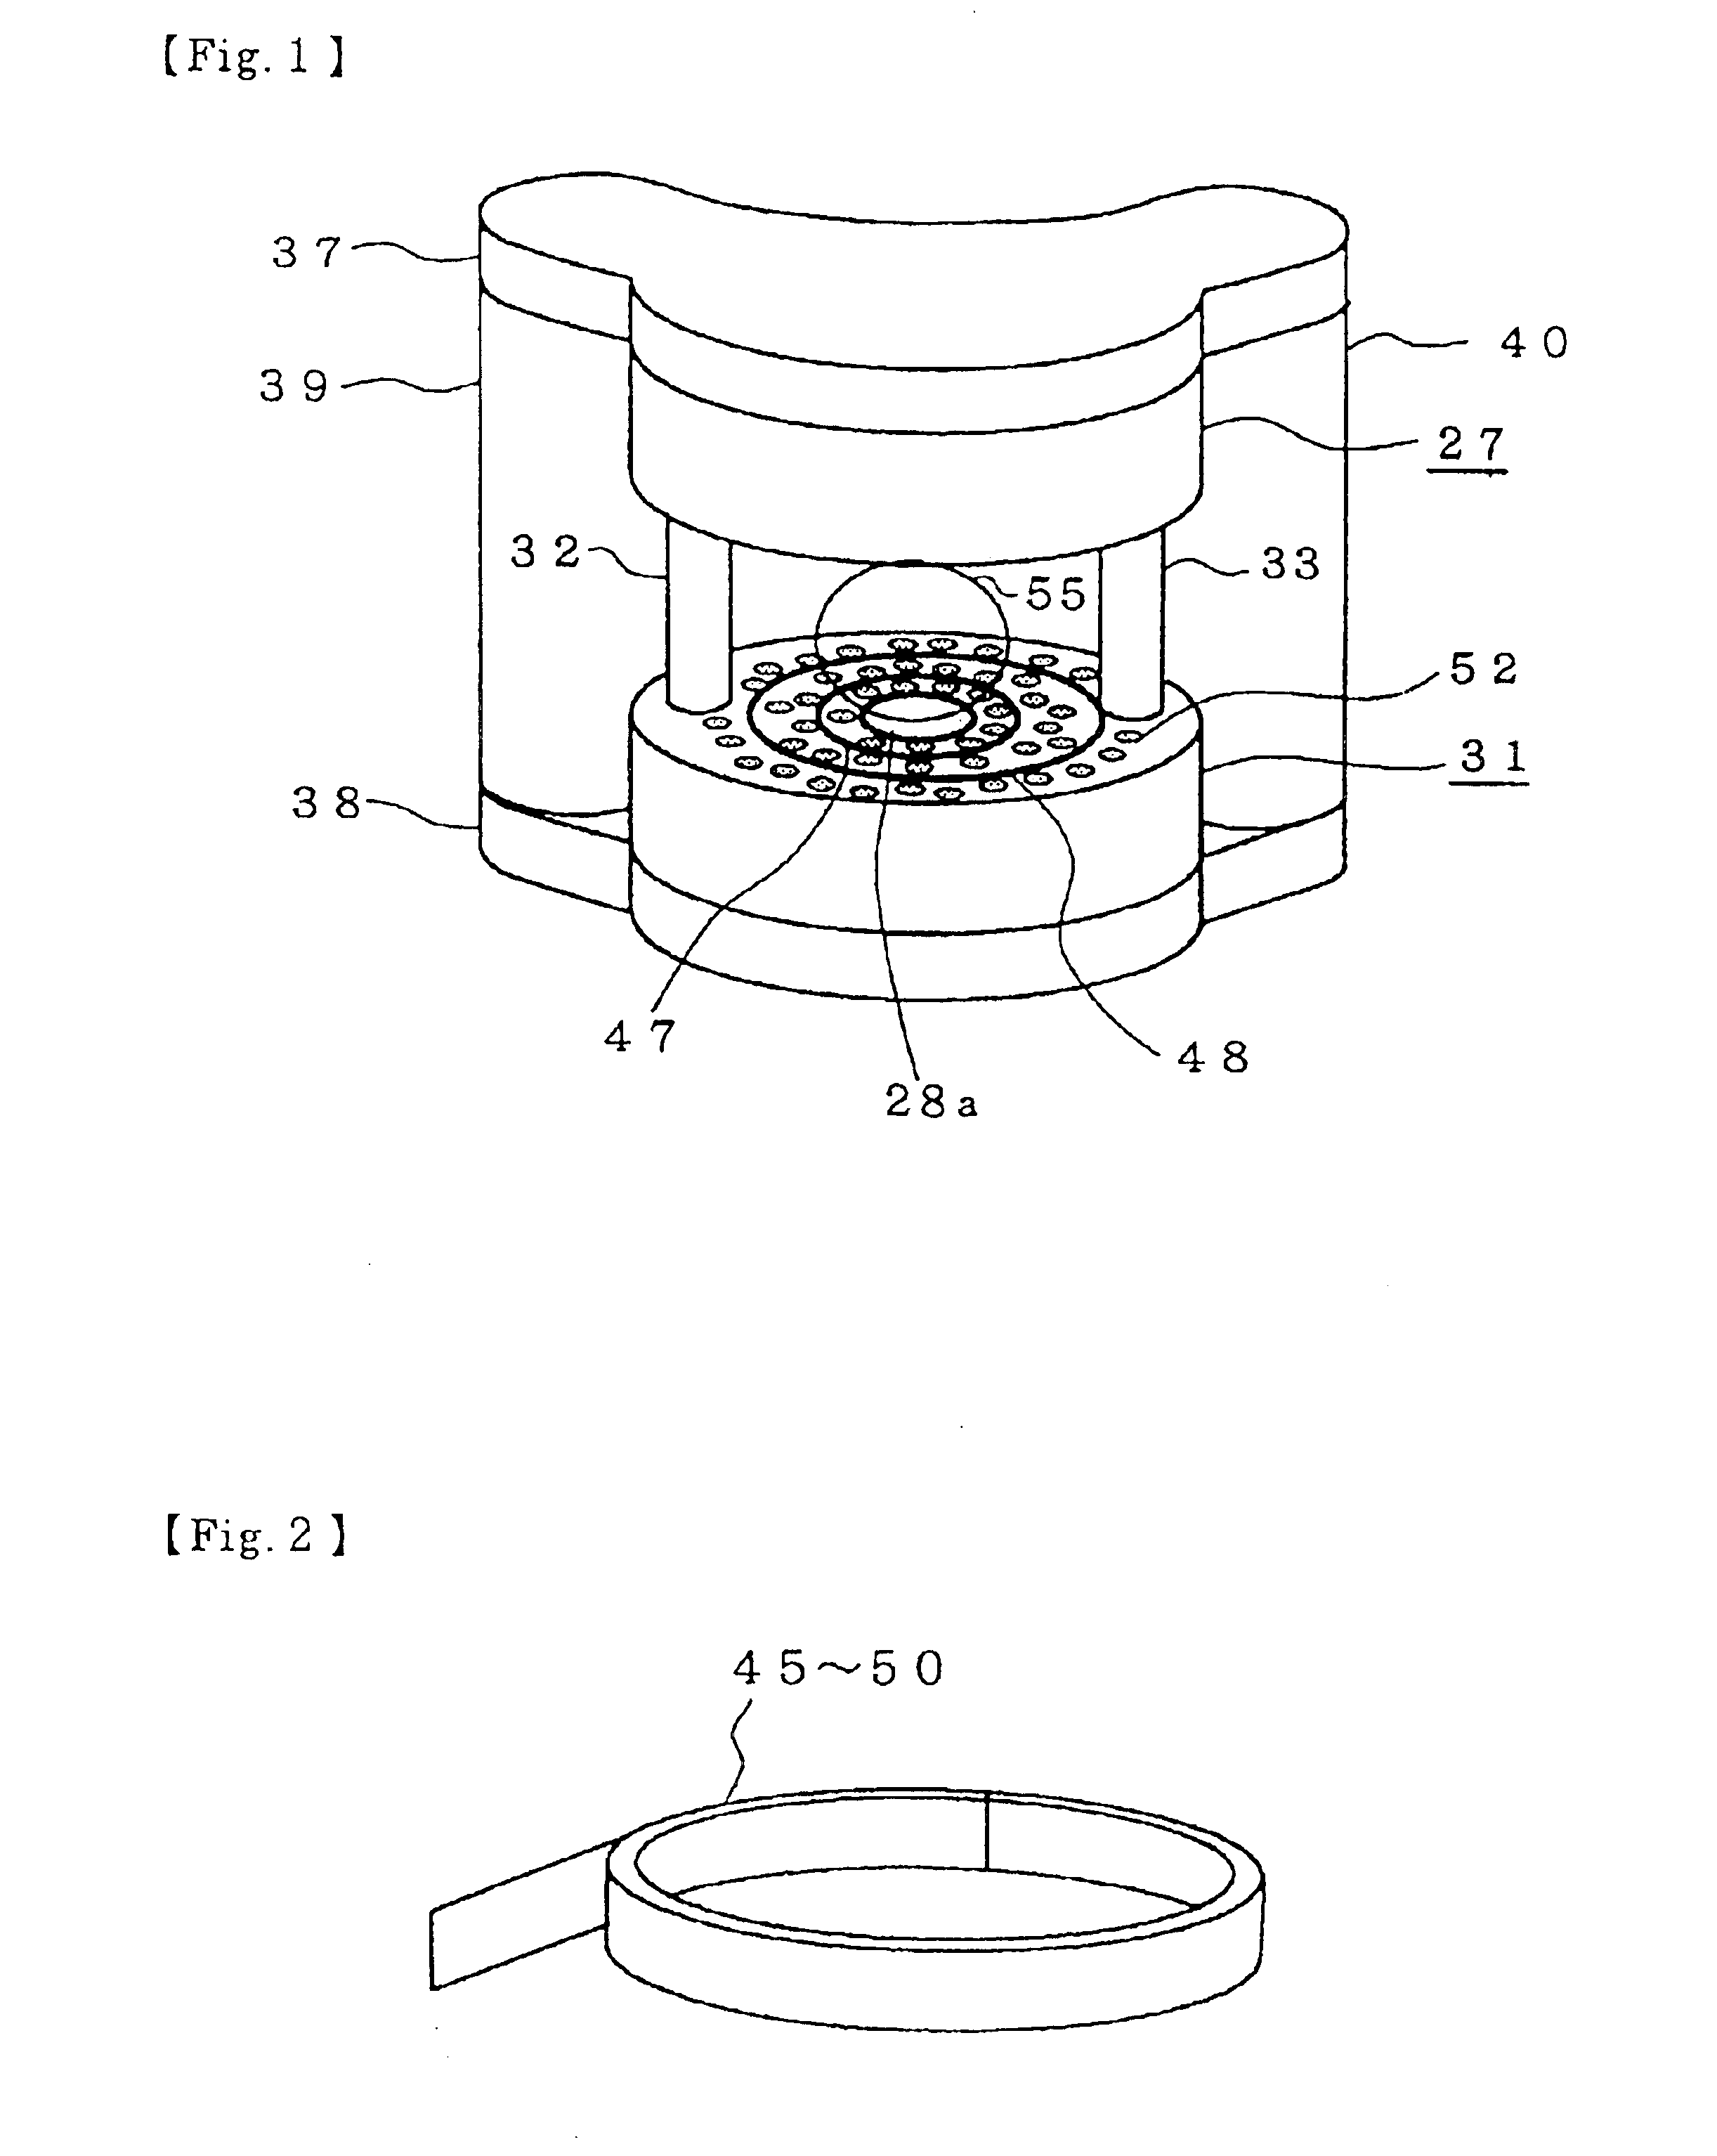 Superconductive magnet device